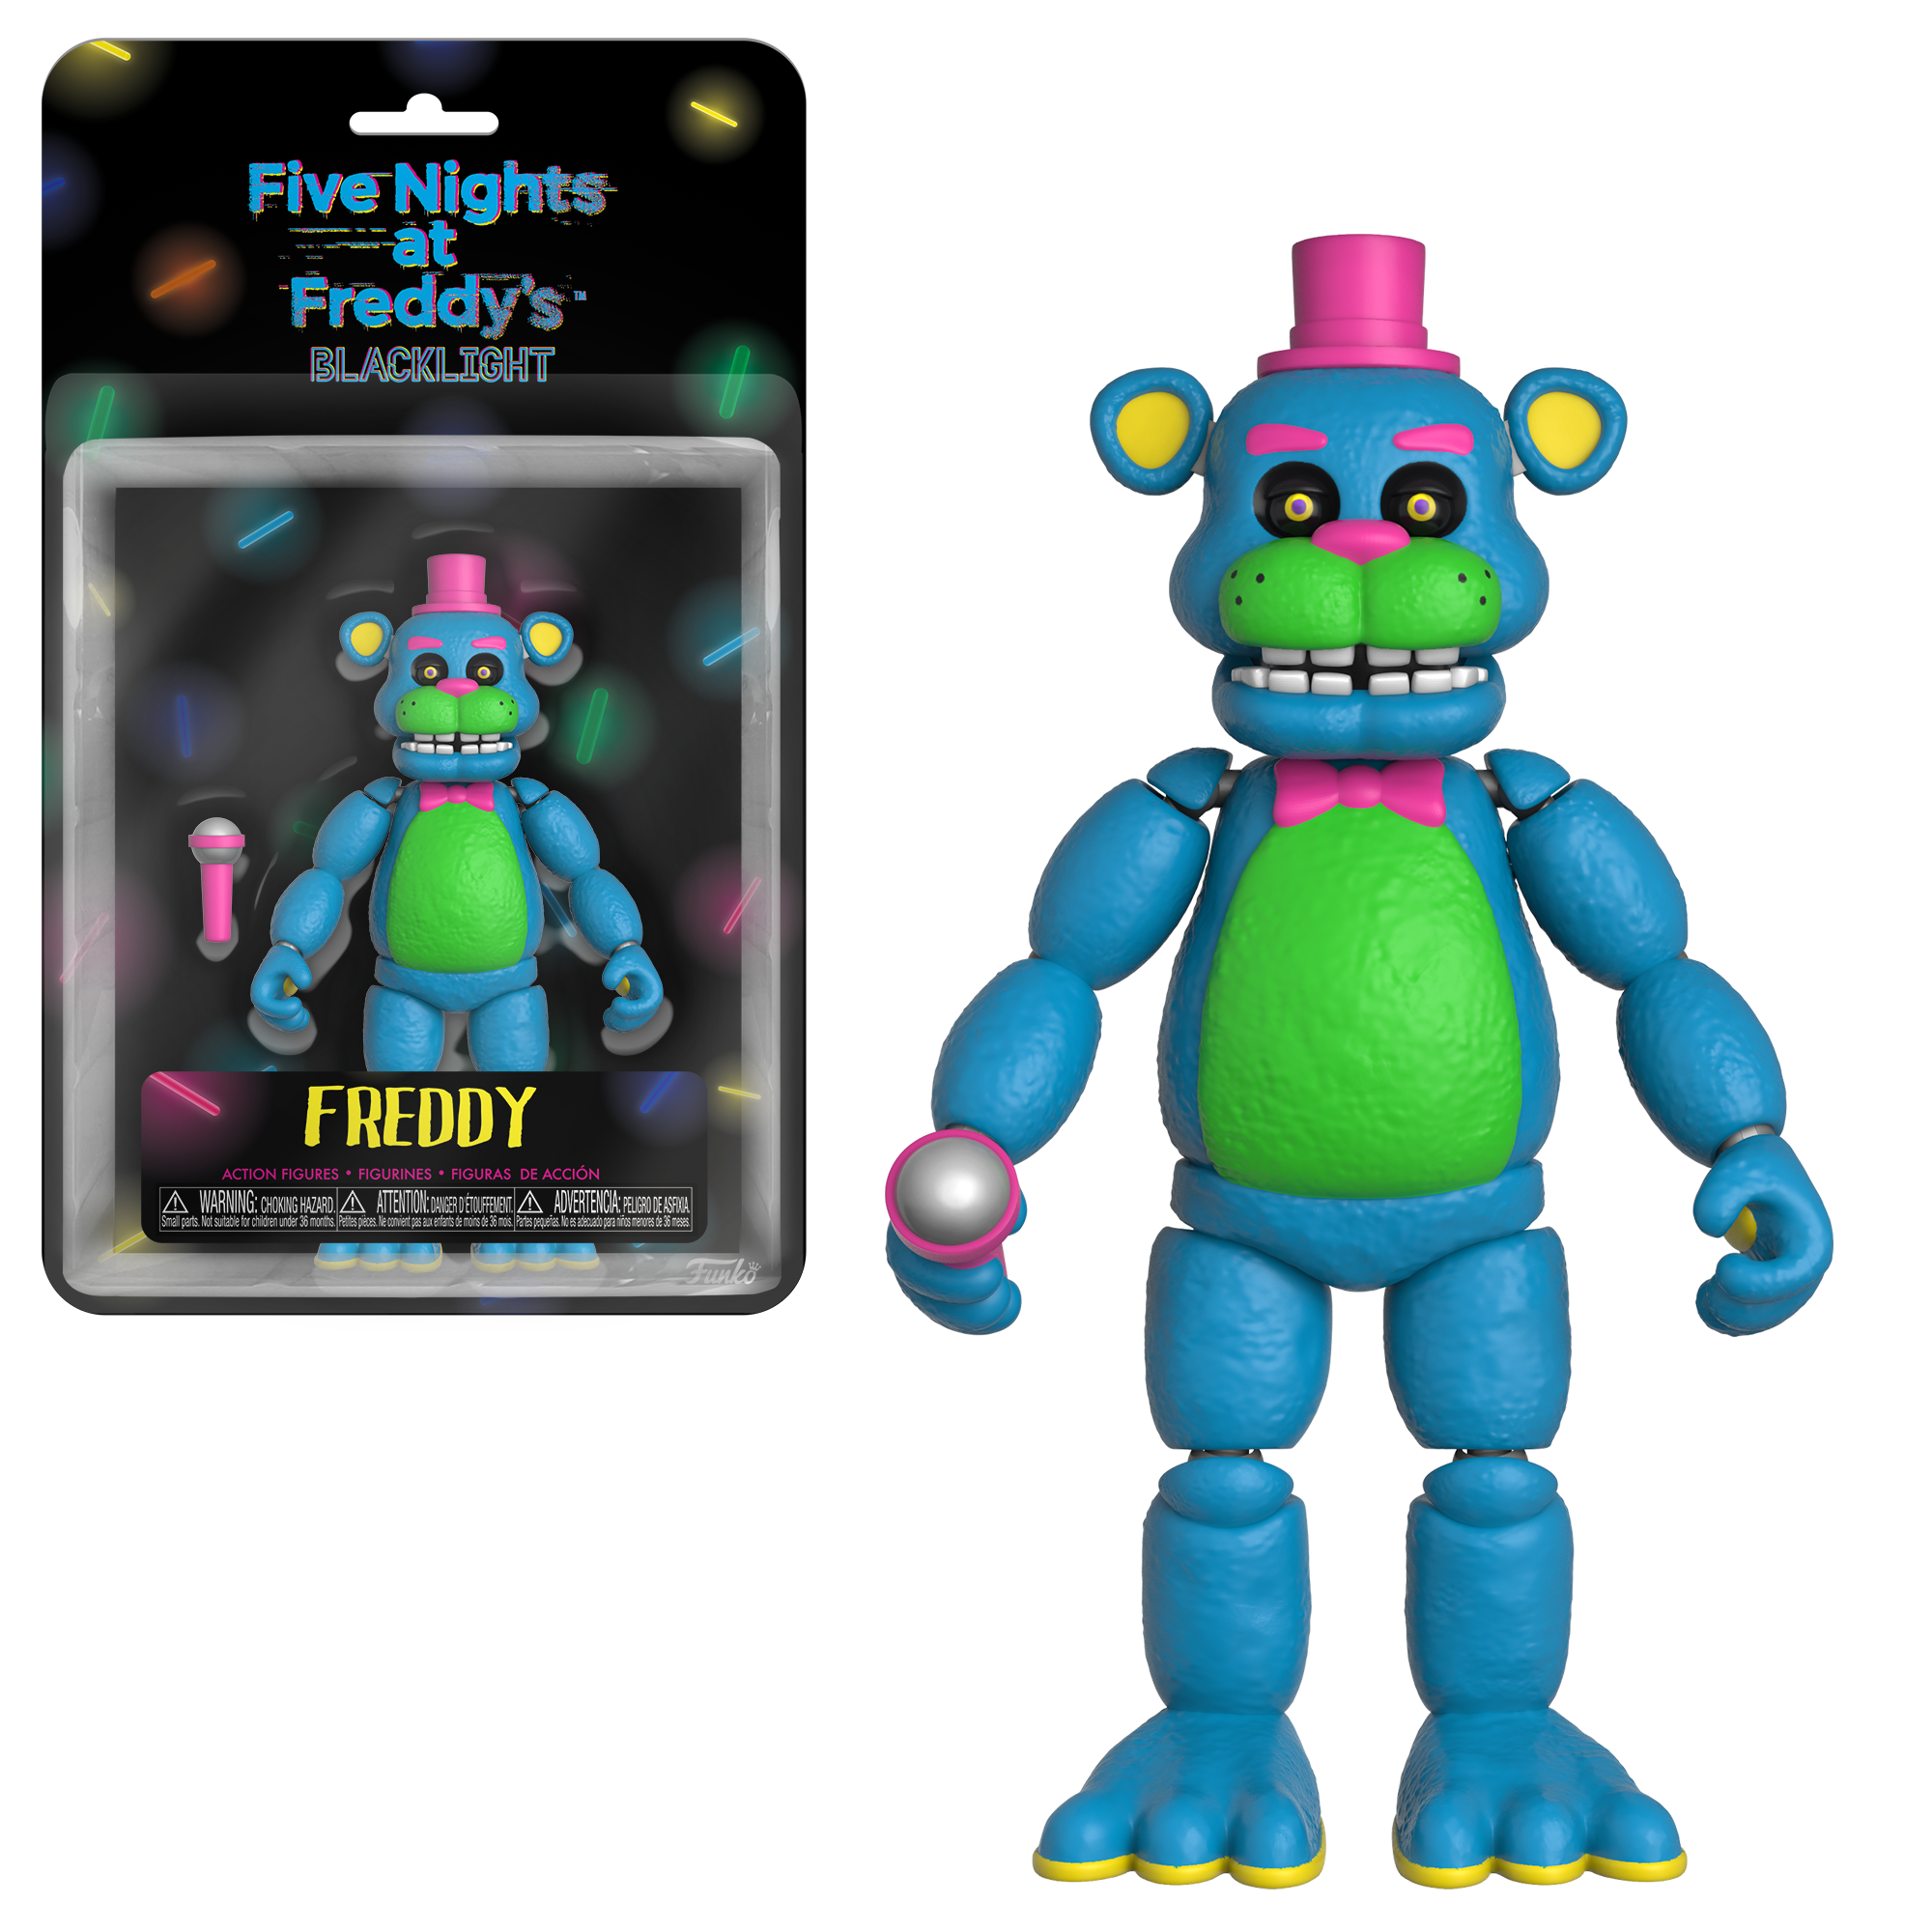 Five Nights At Freddys 5 Inch Action Figure   Blacklight Freddy?$pdp$